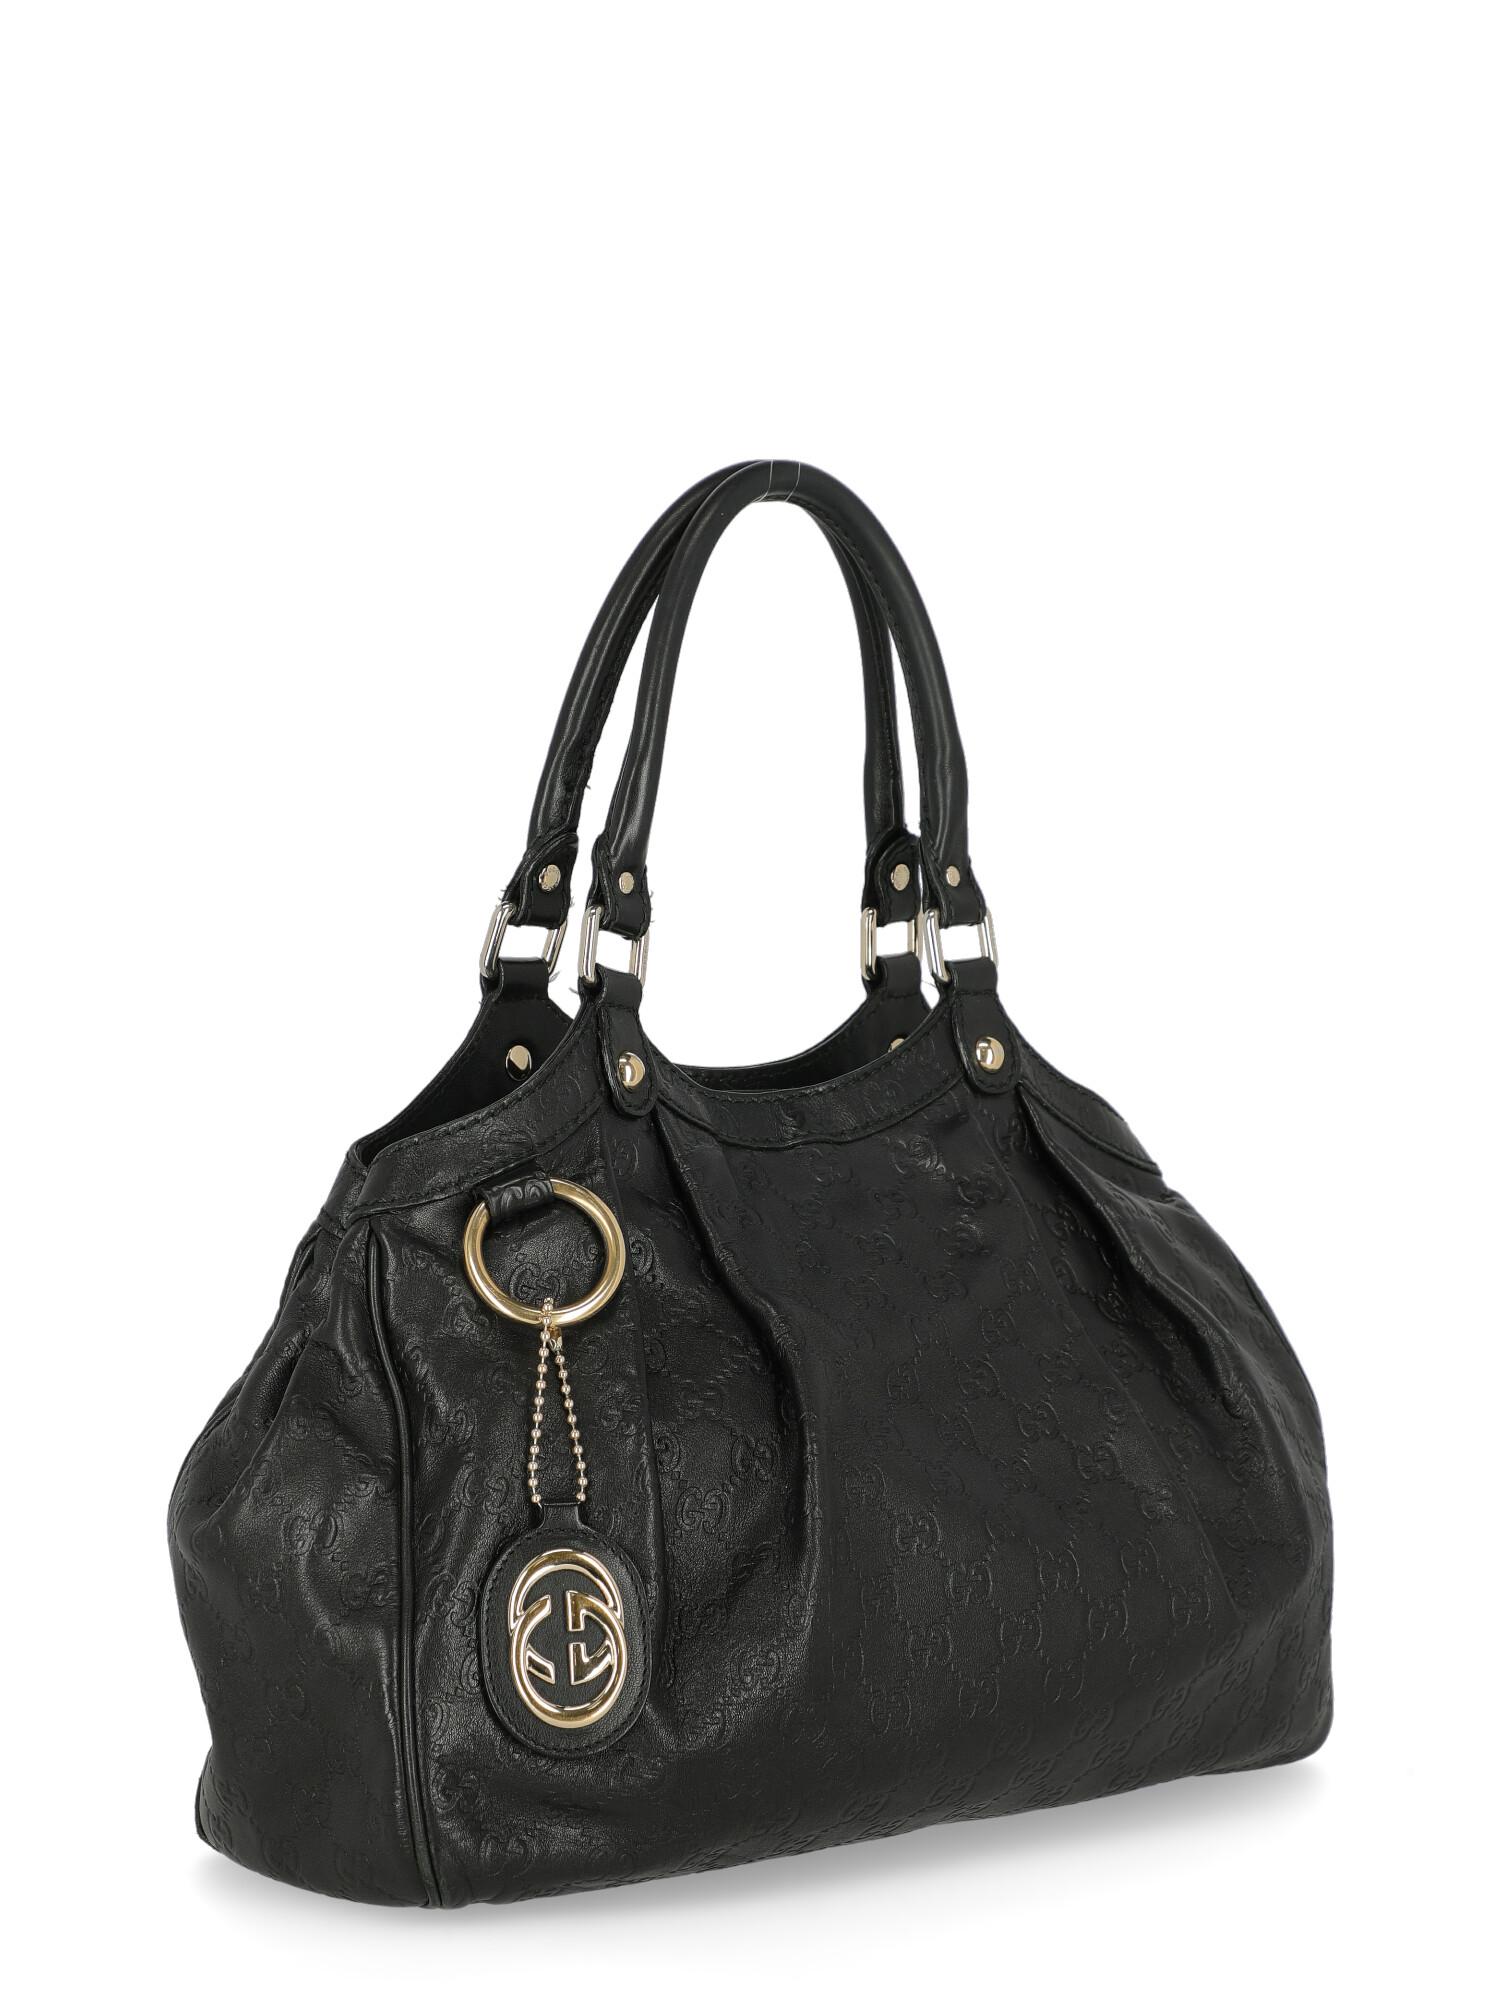 Gucci  Women   Shoulder bags   Black Leather  In Good Condition For Sale In Milan, IT